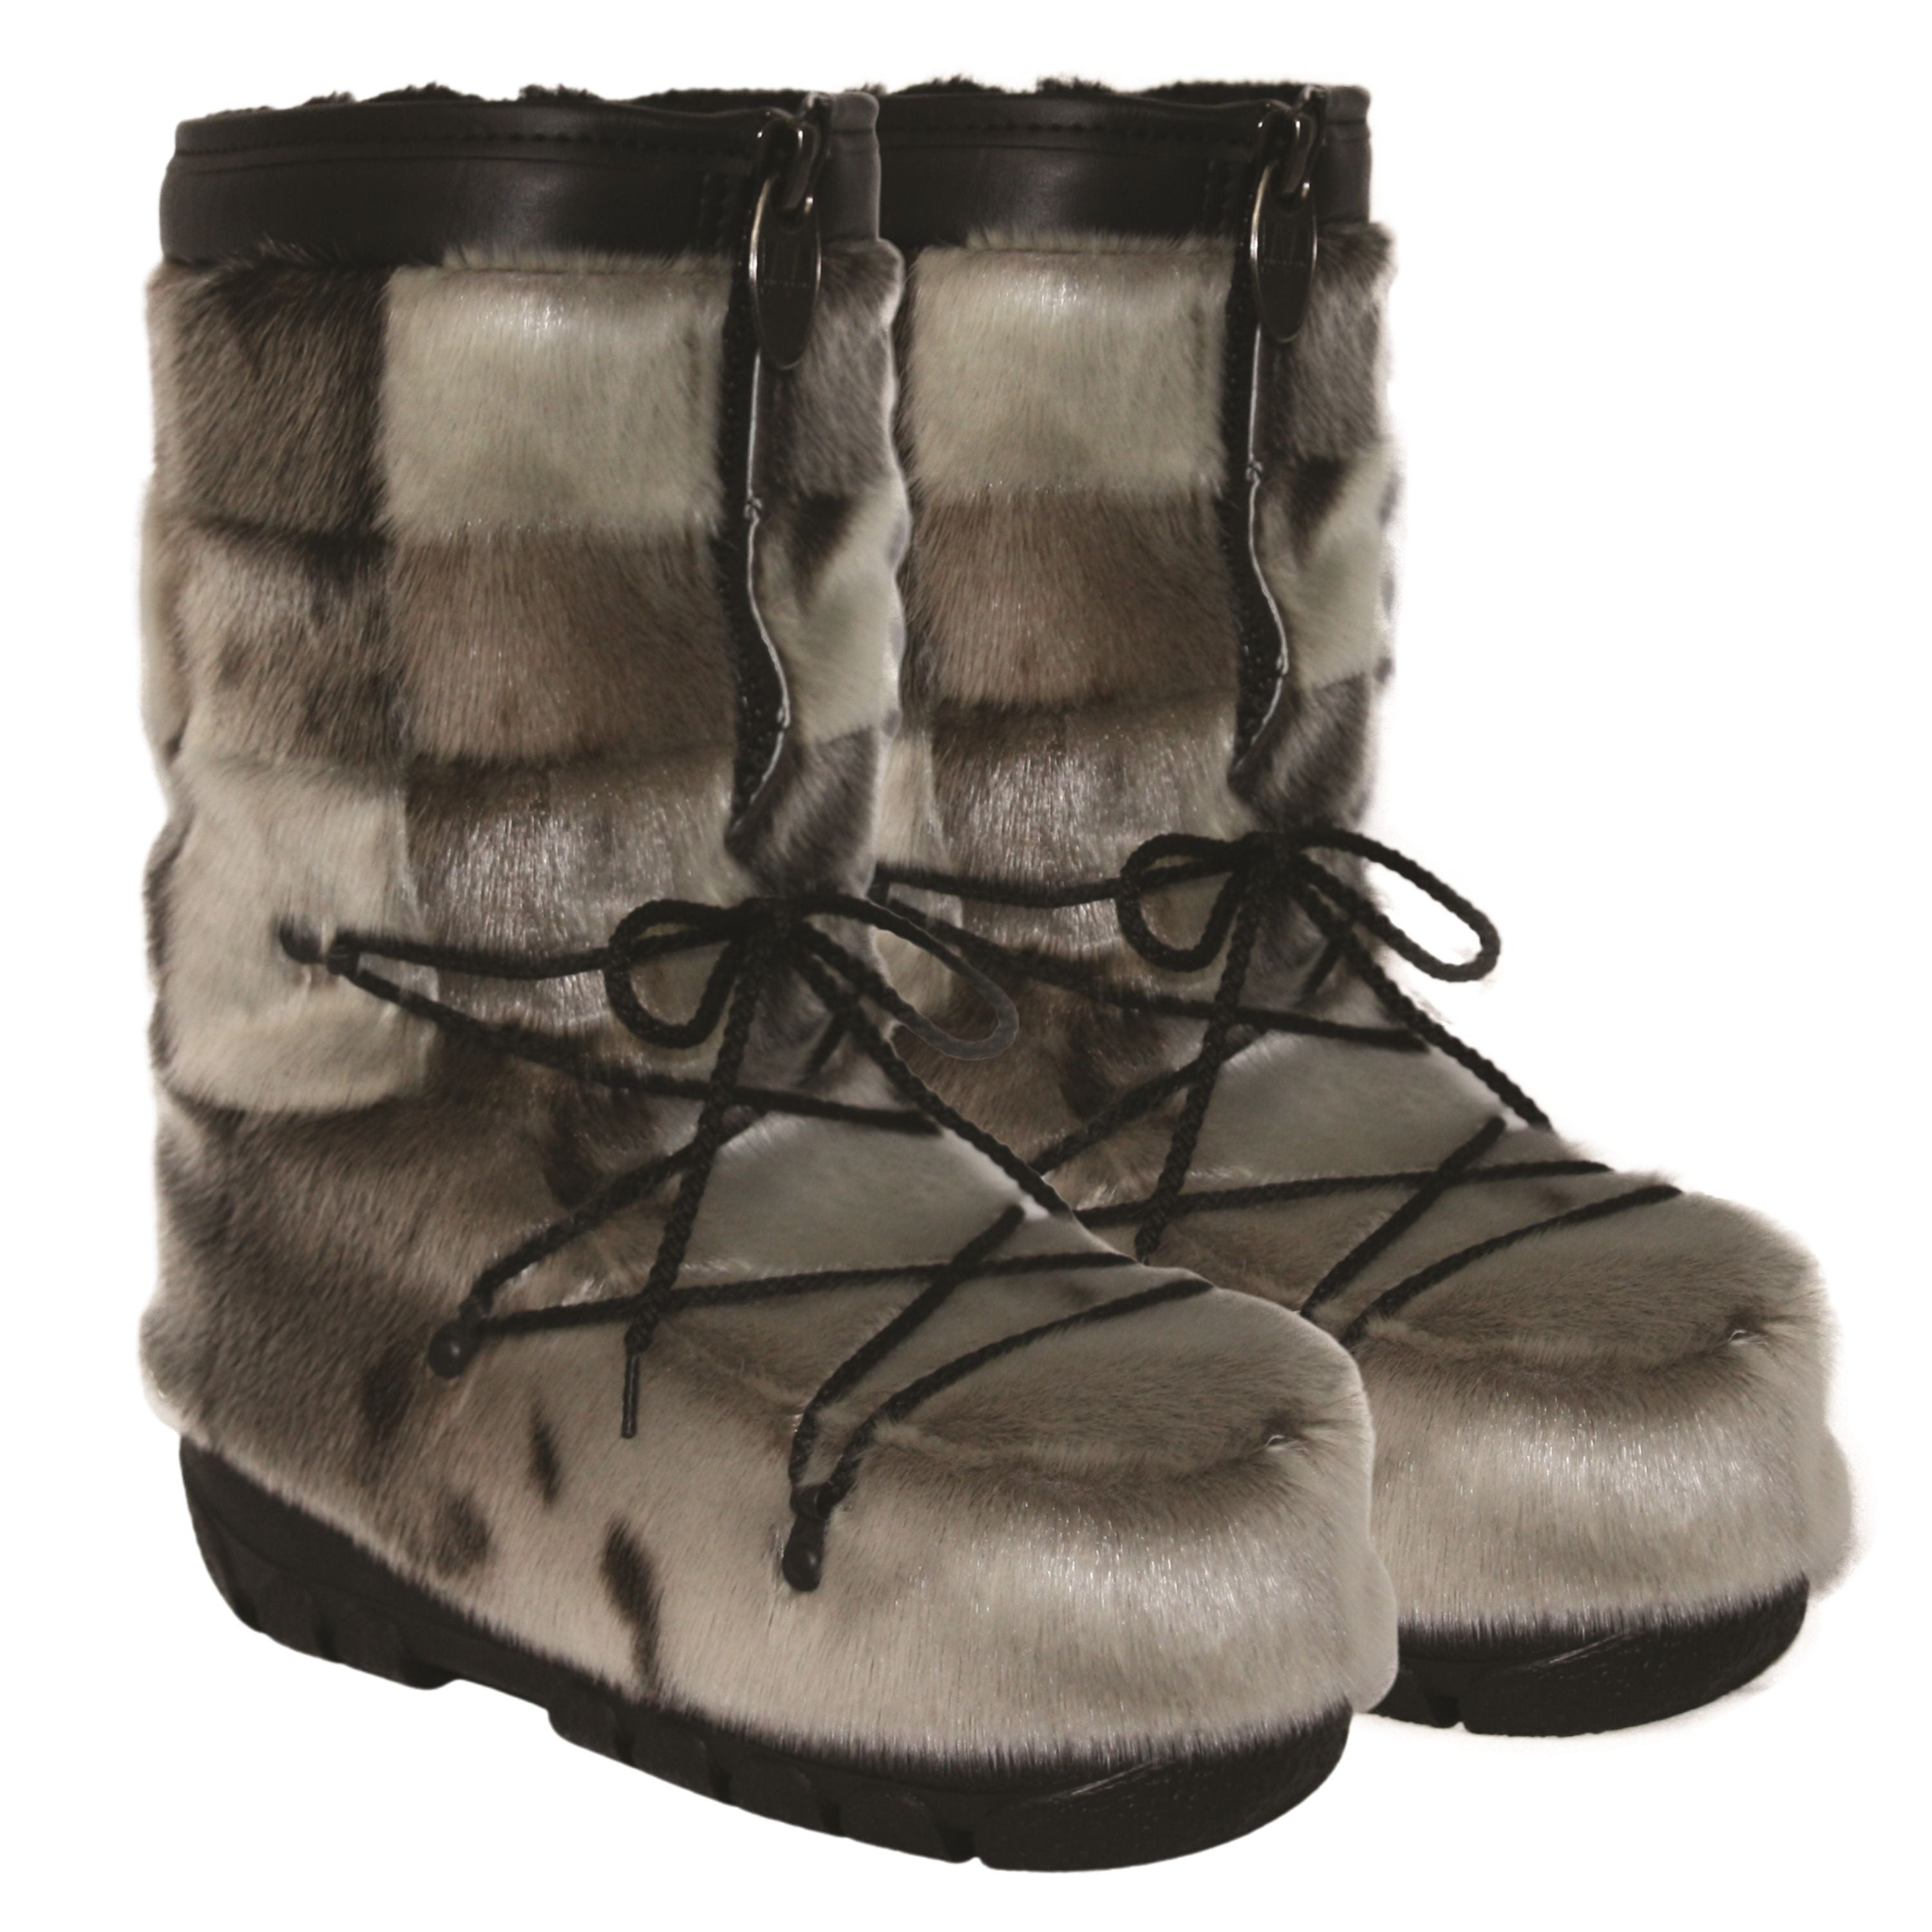 "checked style" Seal fur boots - Men's